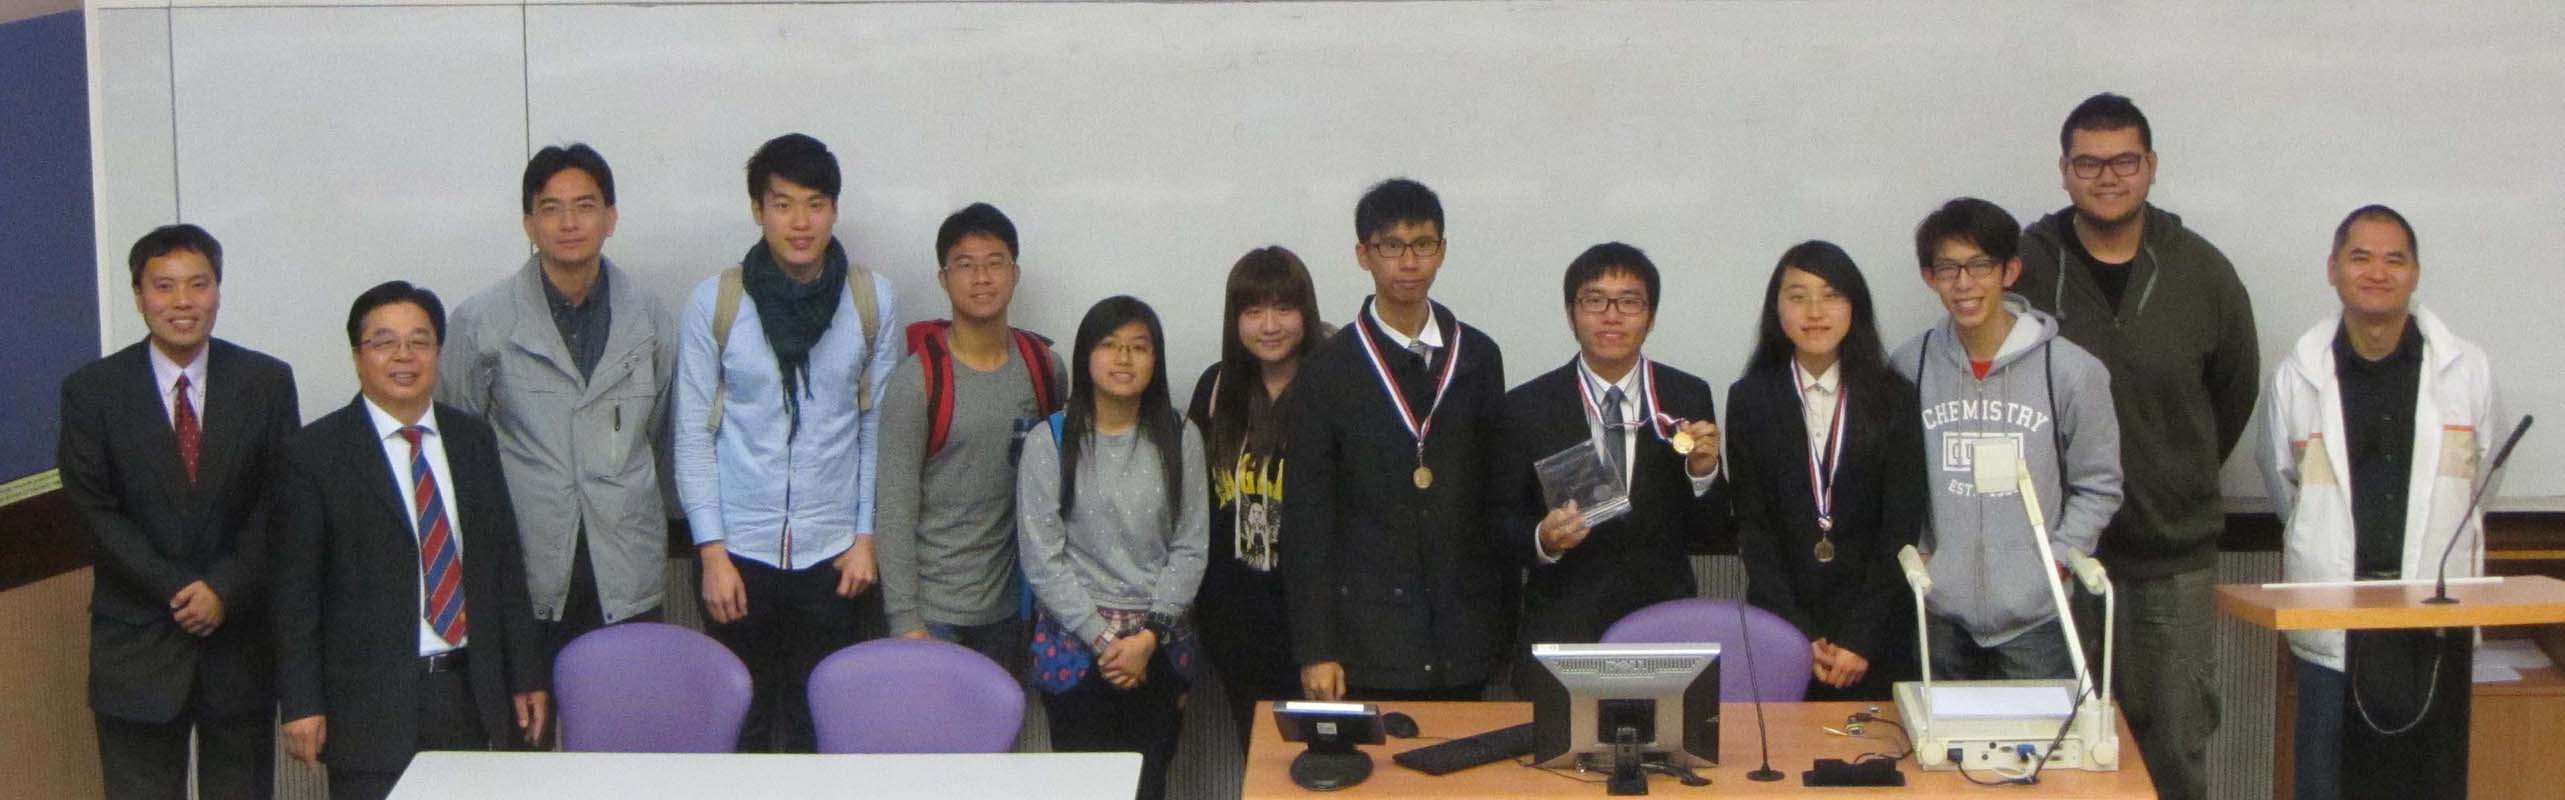 CUHK Team taking photo with the Chairman and teaching staff